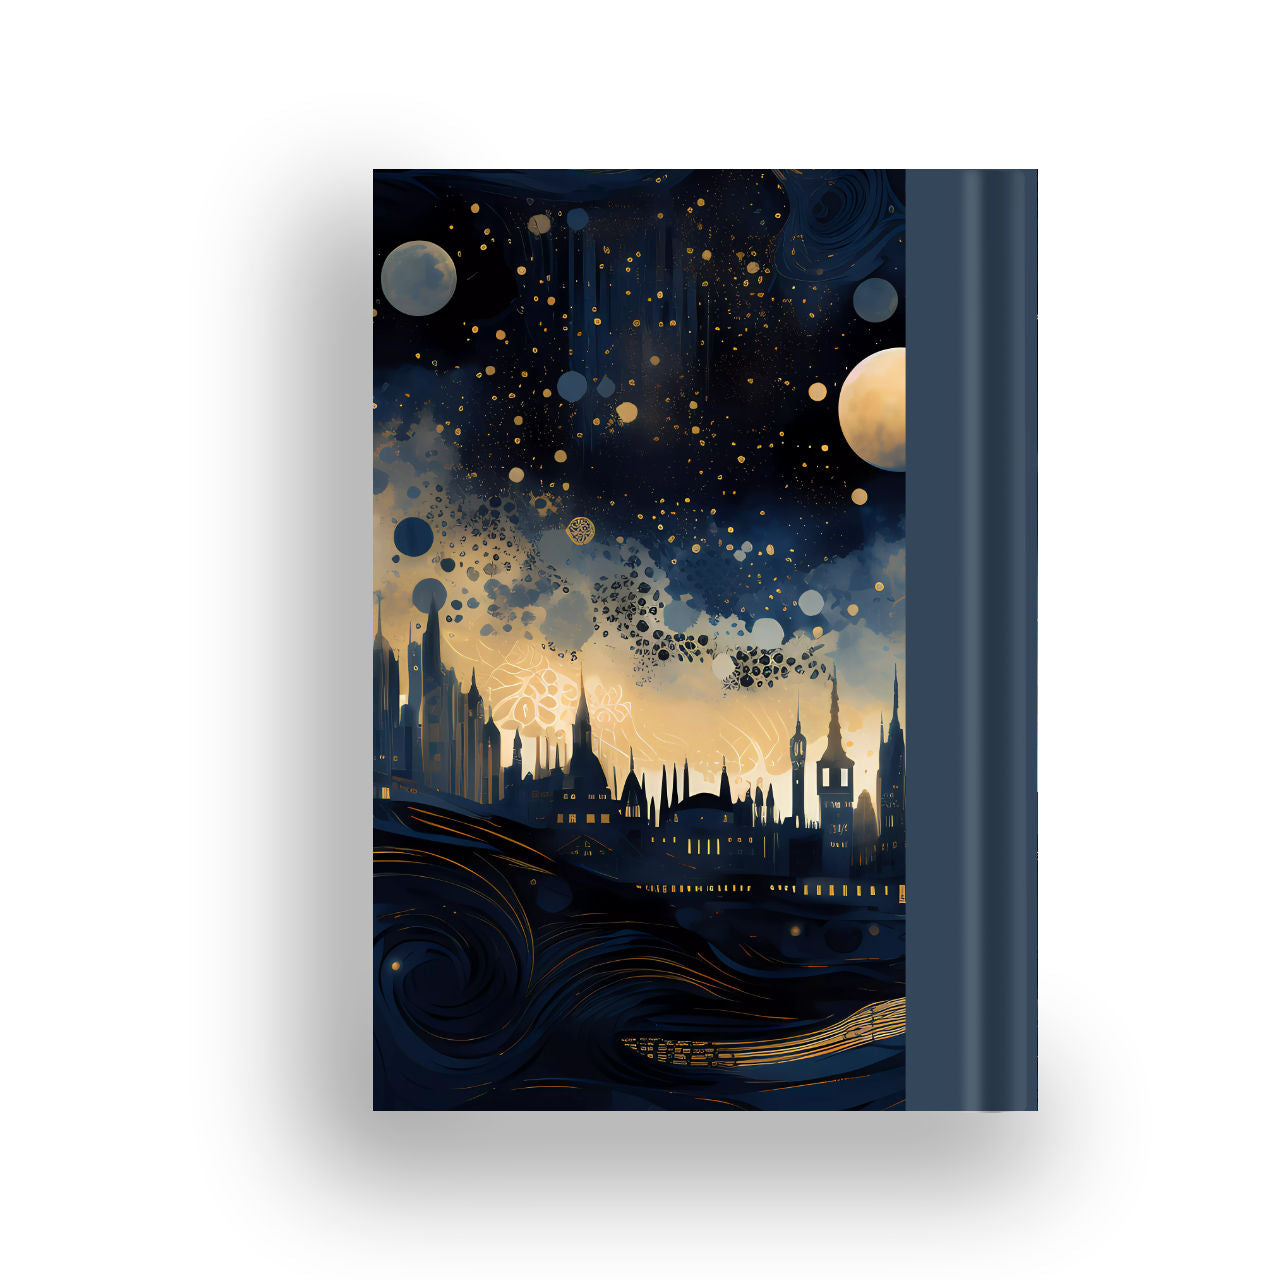 Astral - 2024 Diary & wellness tracker